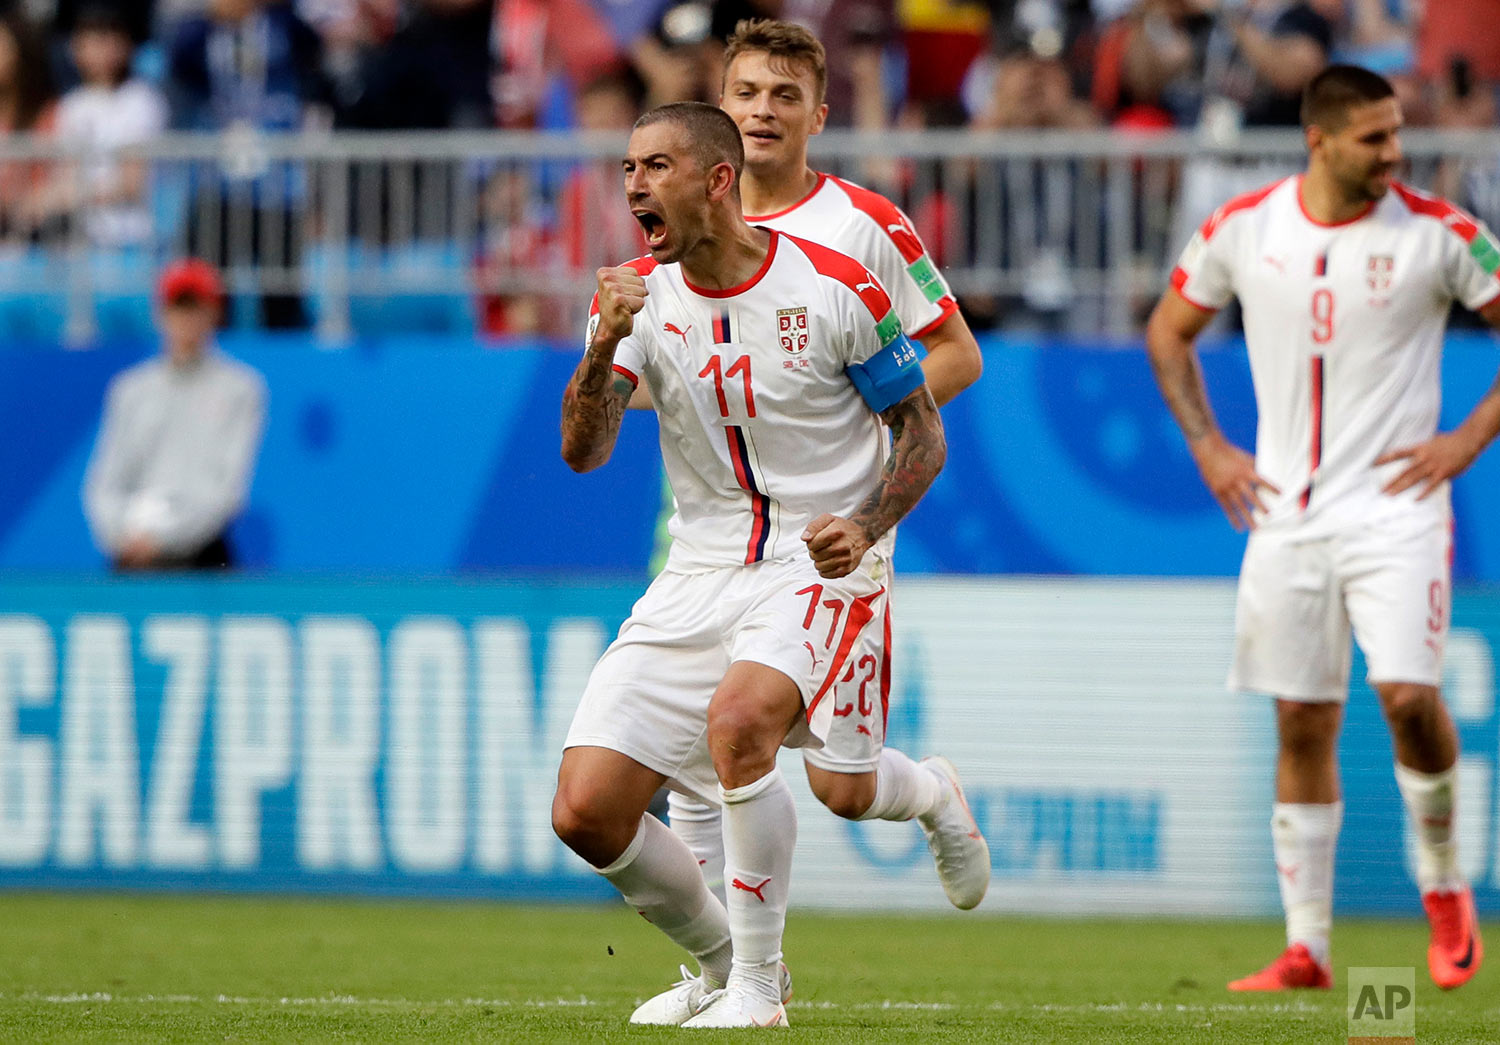  Serbia's Aleksandar Kolarov celebrates after scoring the opening goal during the group E match between Costa Rica and Serbia at the 2018 soccer World Cup in the Samara Arena in Samara, Russia, Sunday, June 17, 2018. (AP Photo/Mark Baker) 